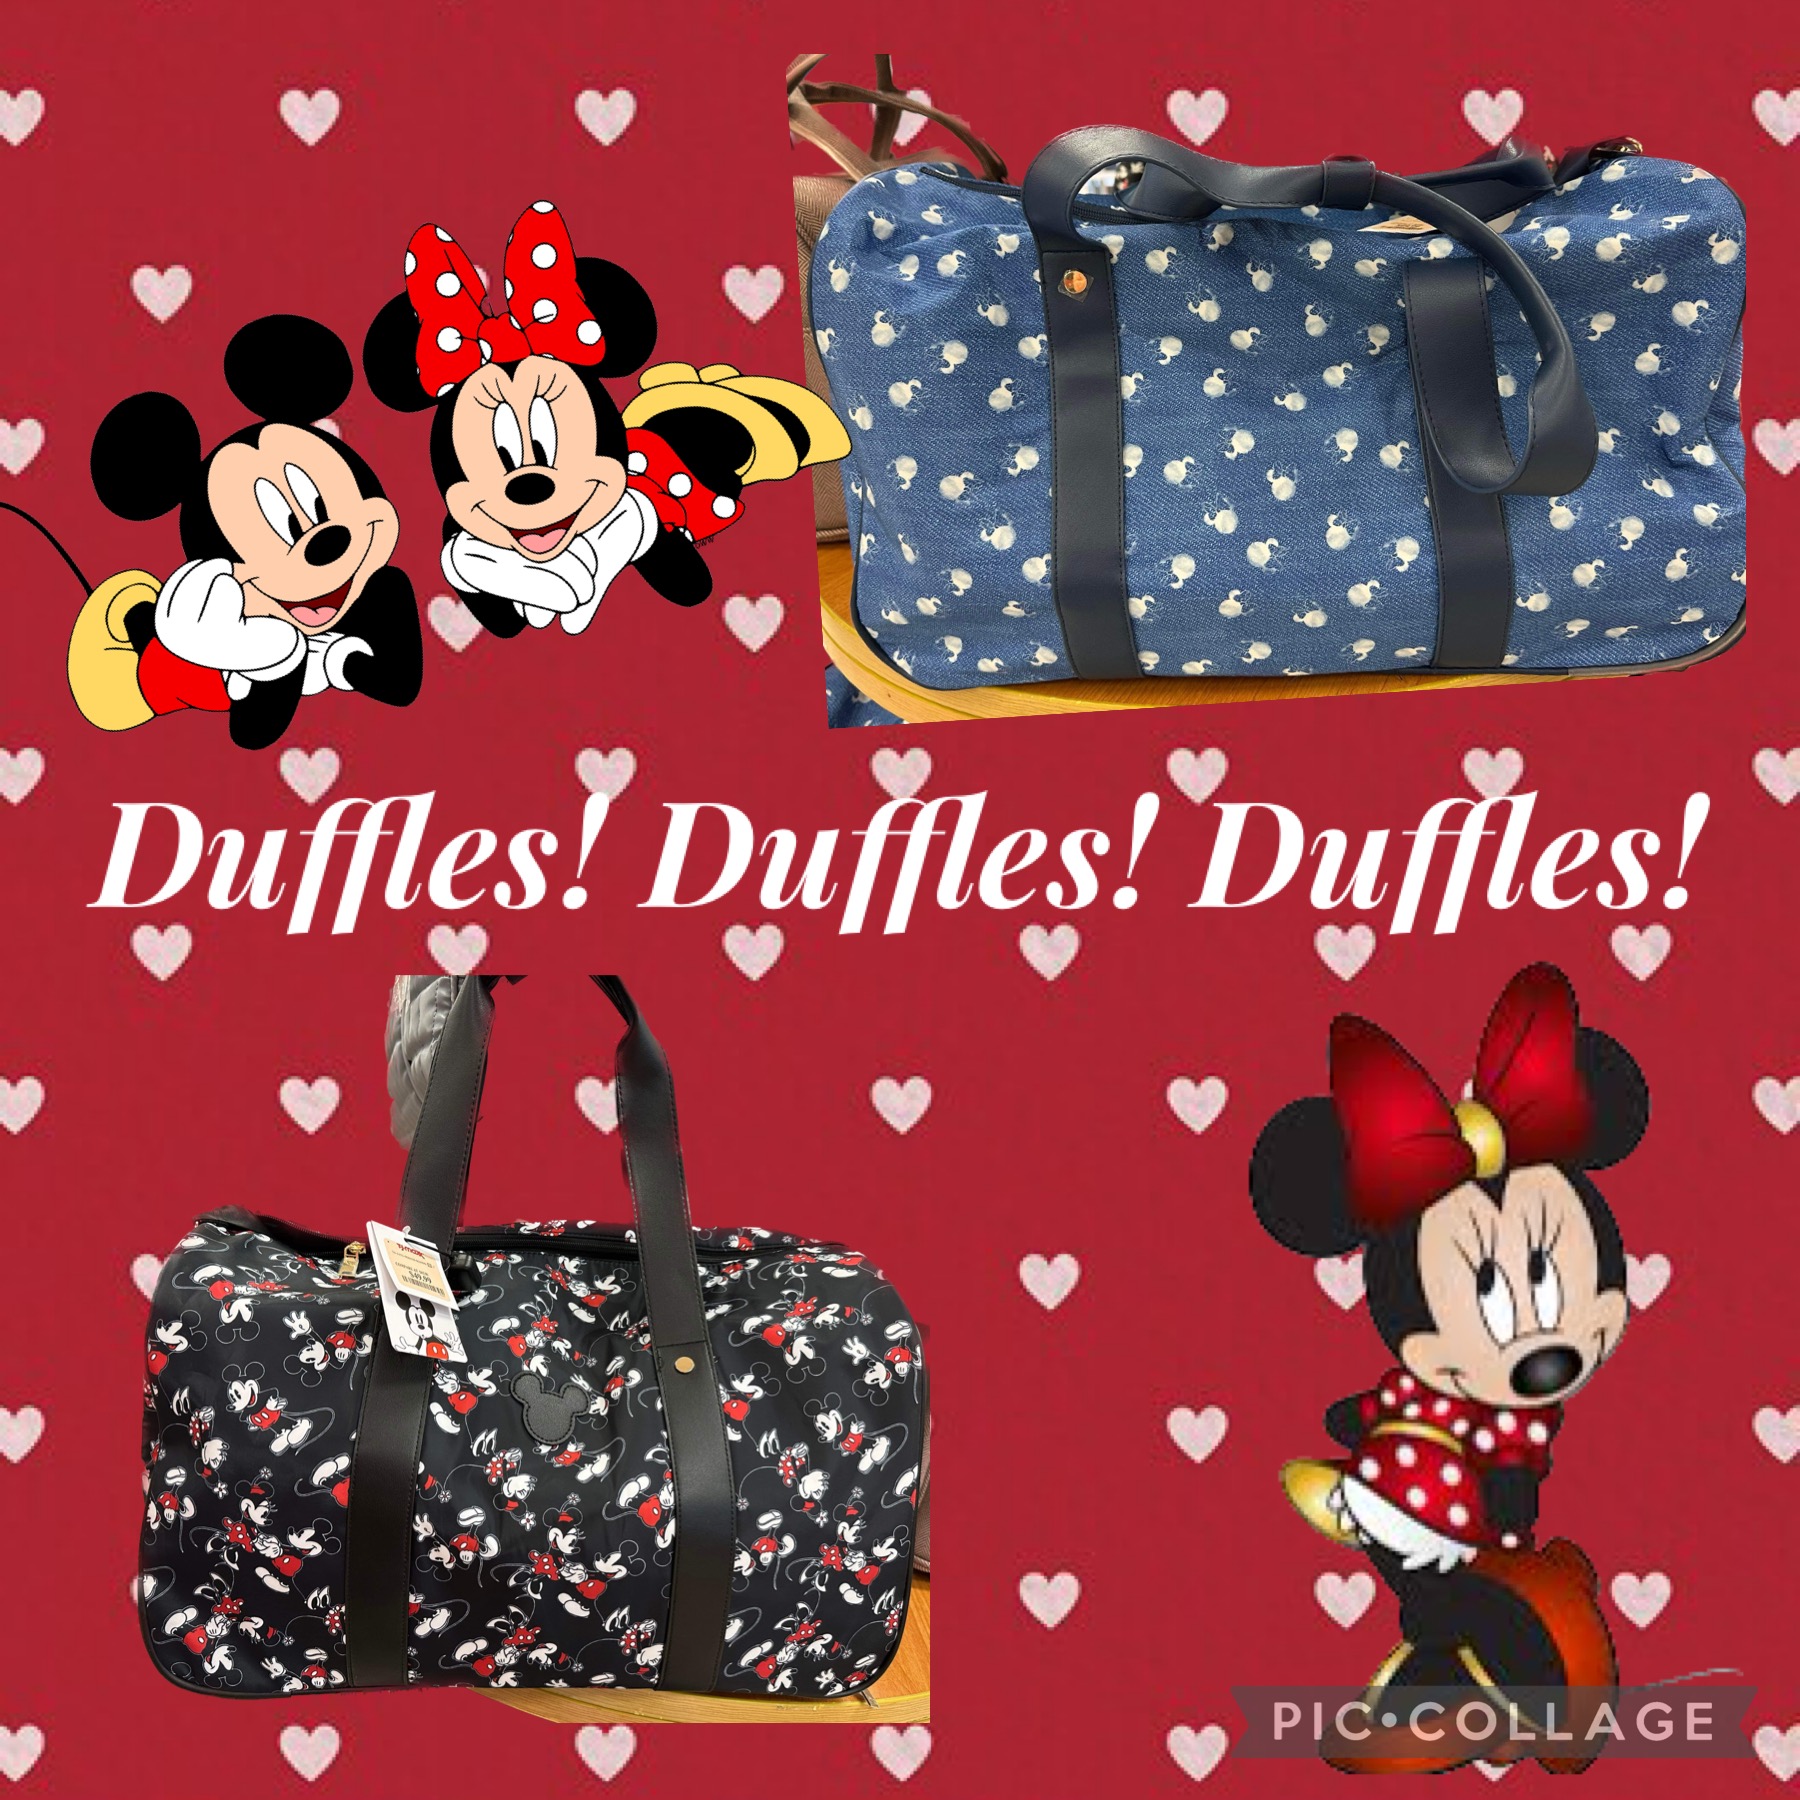 Mickey and Minnie are Going Places! - bags 